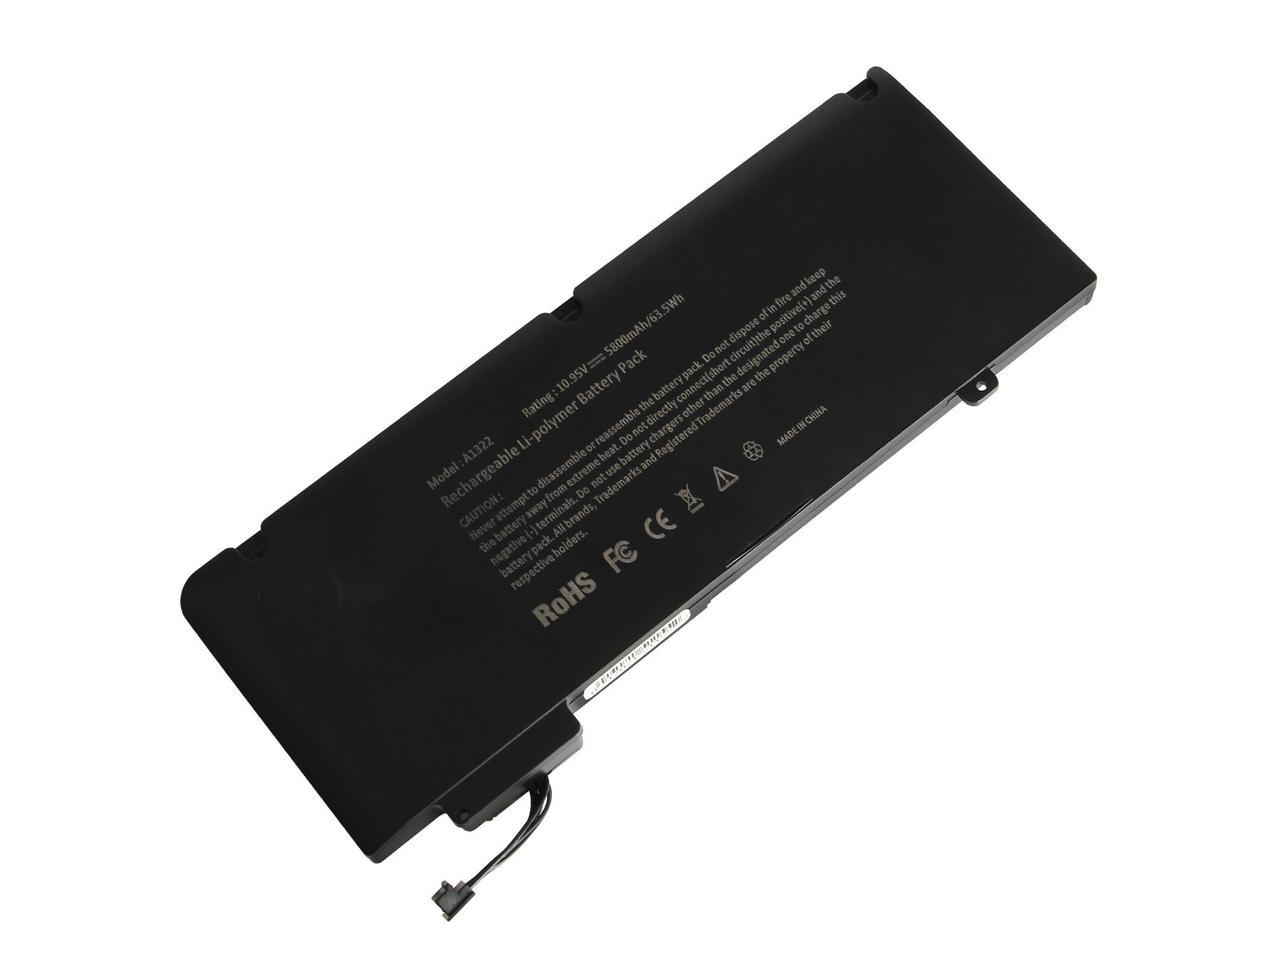 macbook pro 13 late 2011 battery replacement